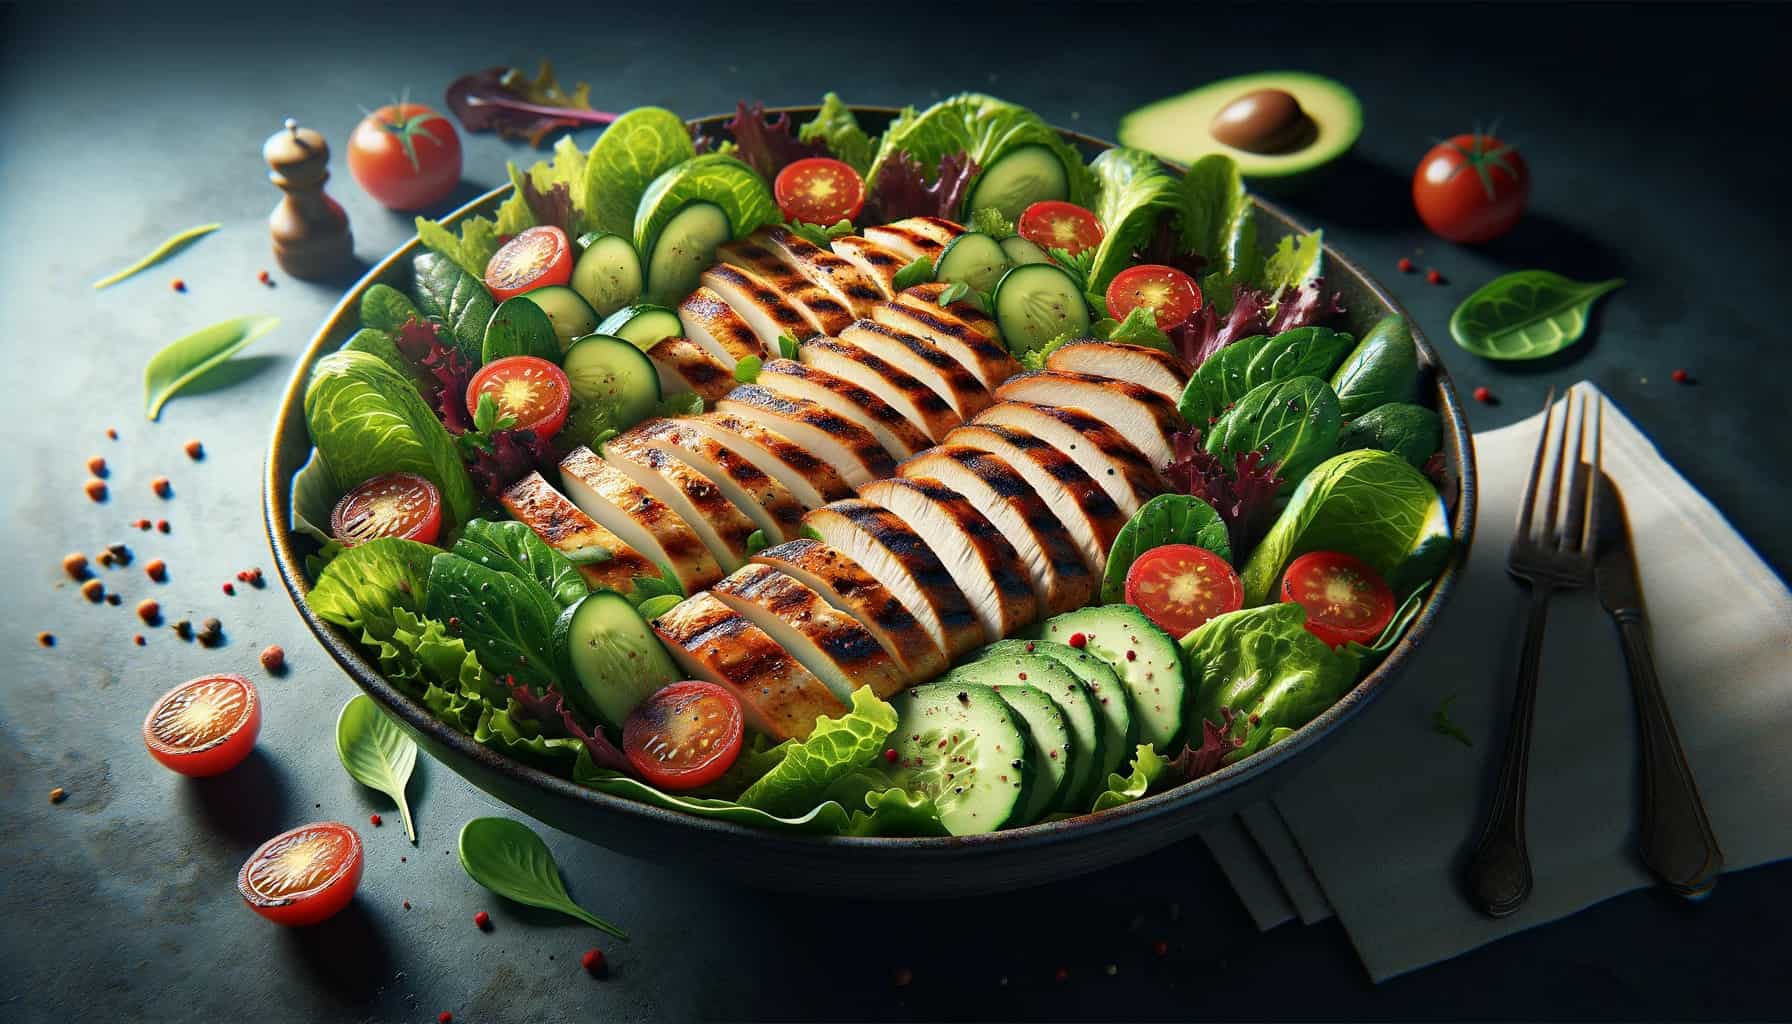 Grilled chicken salad with leafy greens, cherry tomatoes, cucumbers, and avocado slices